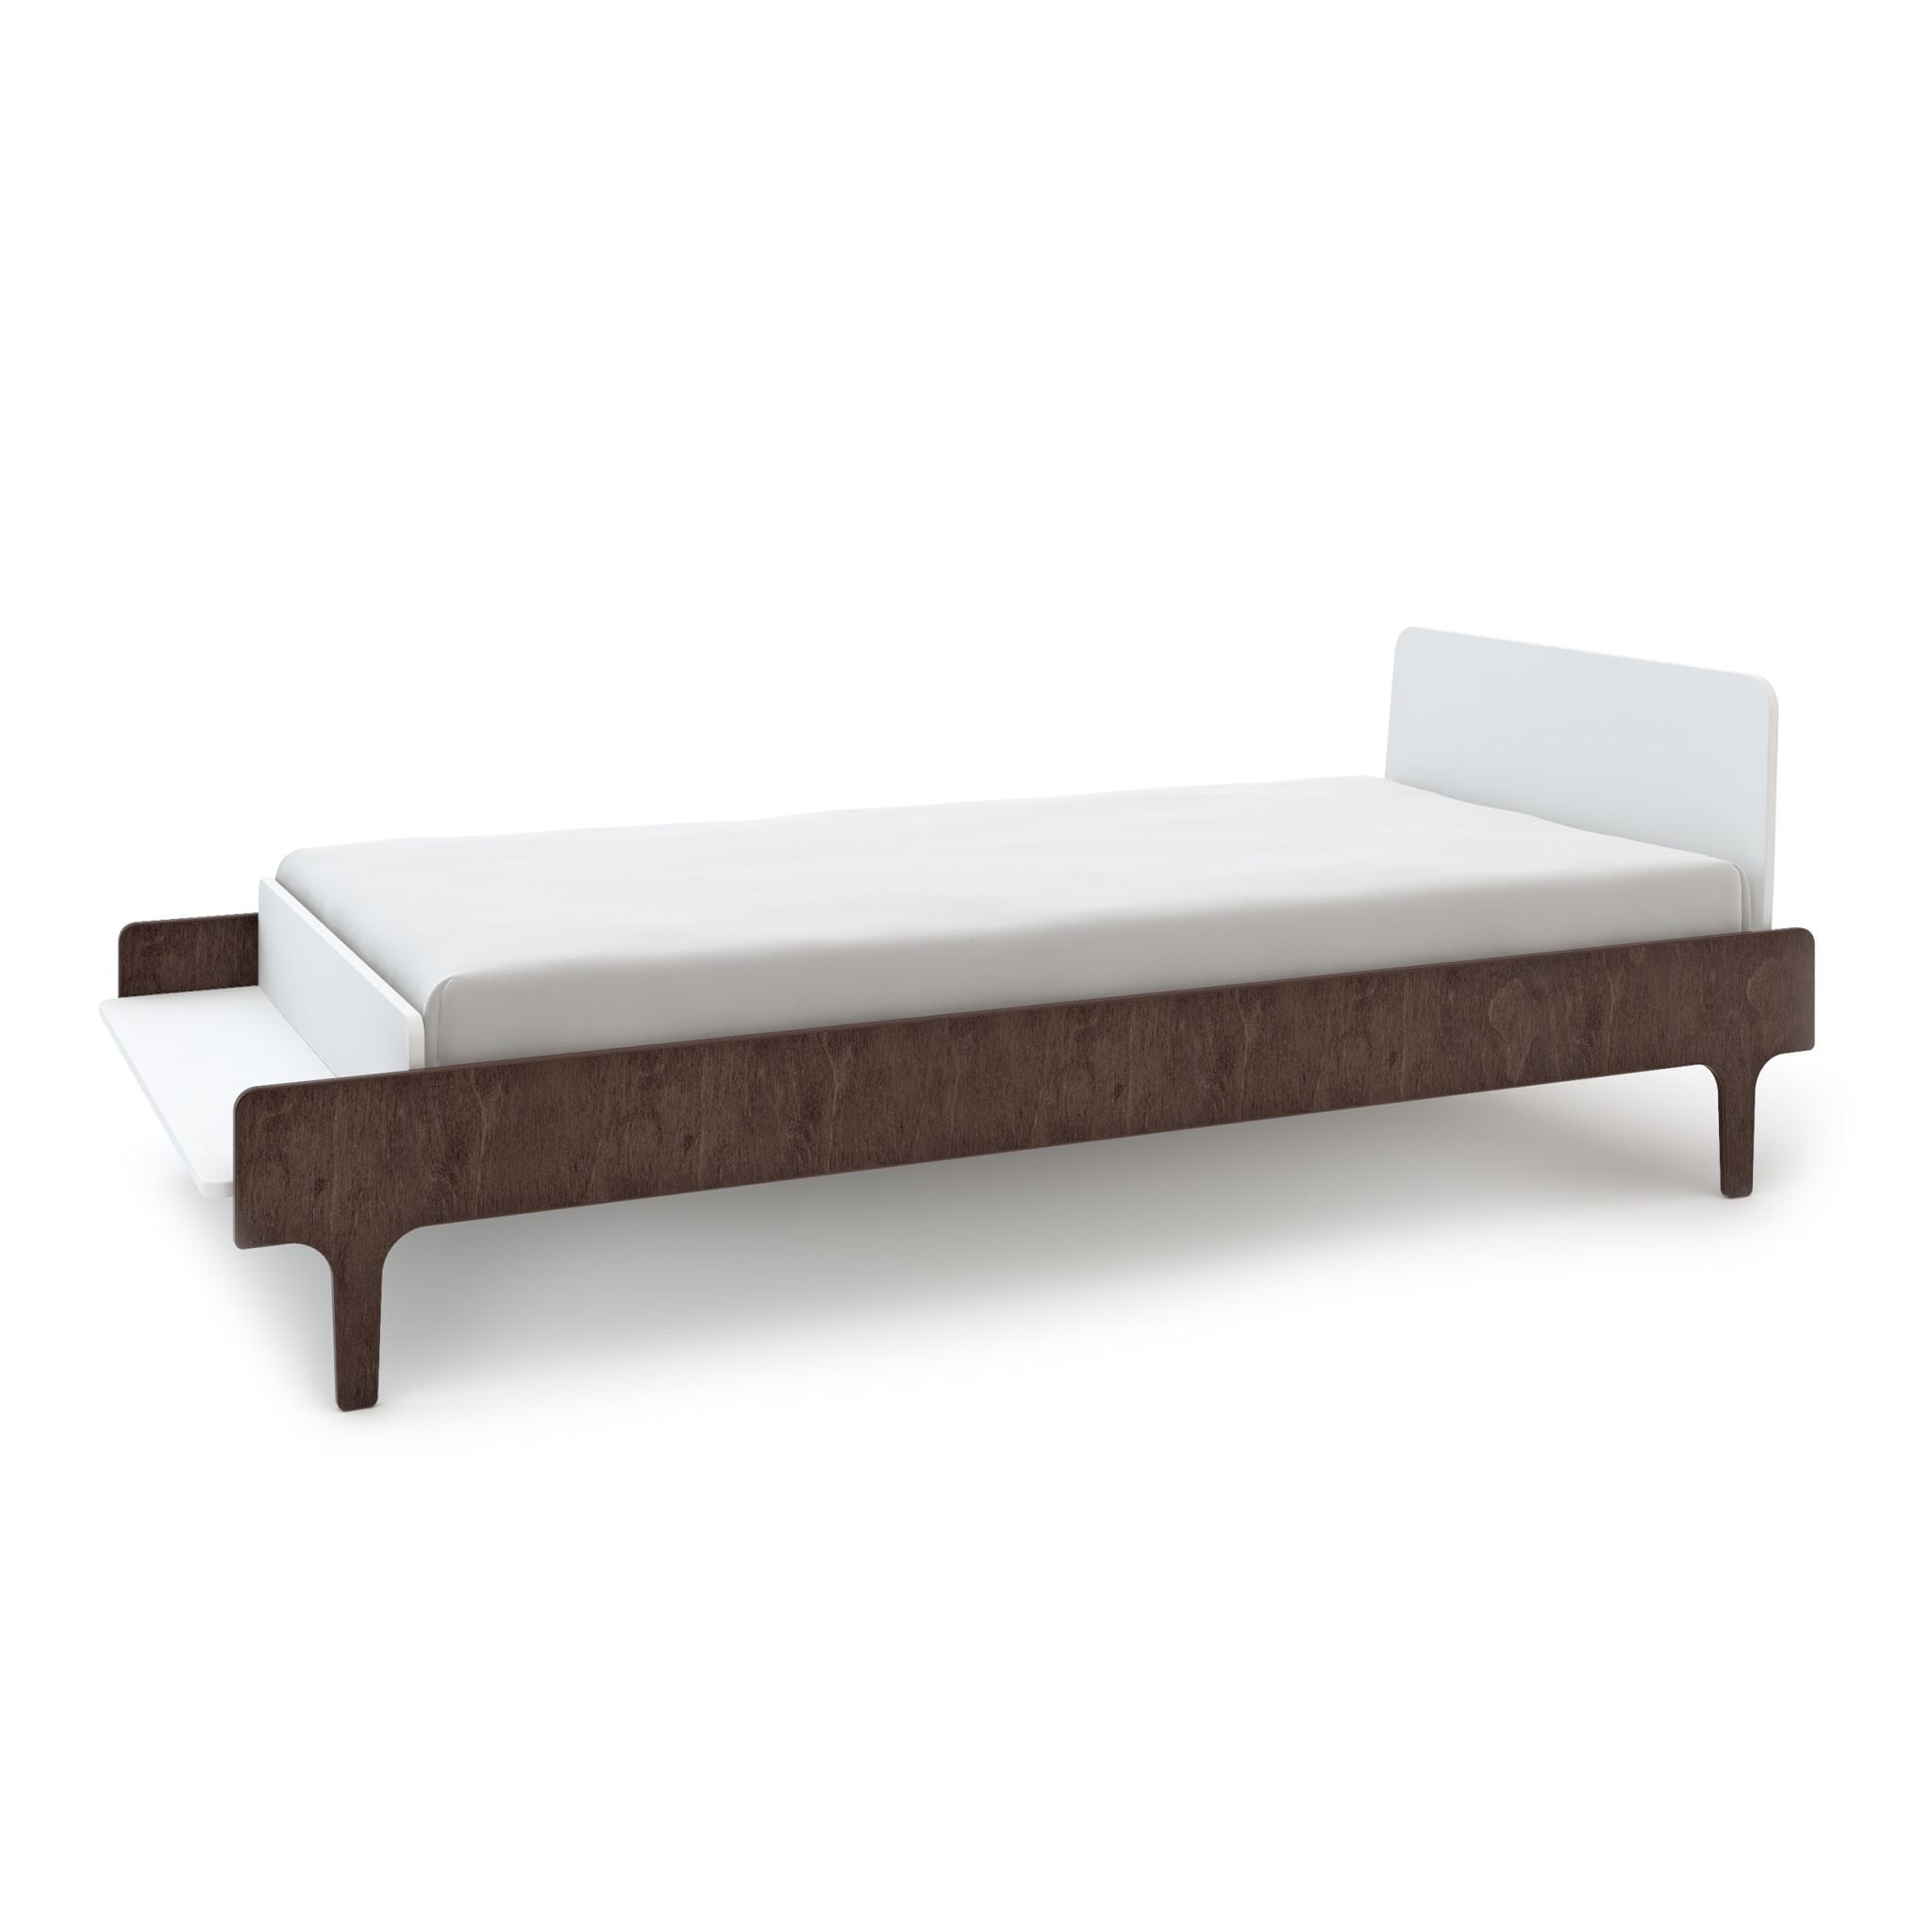 Oeuf River Single bed with optional trundle in White & Walnut